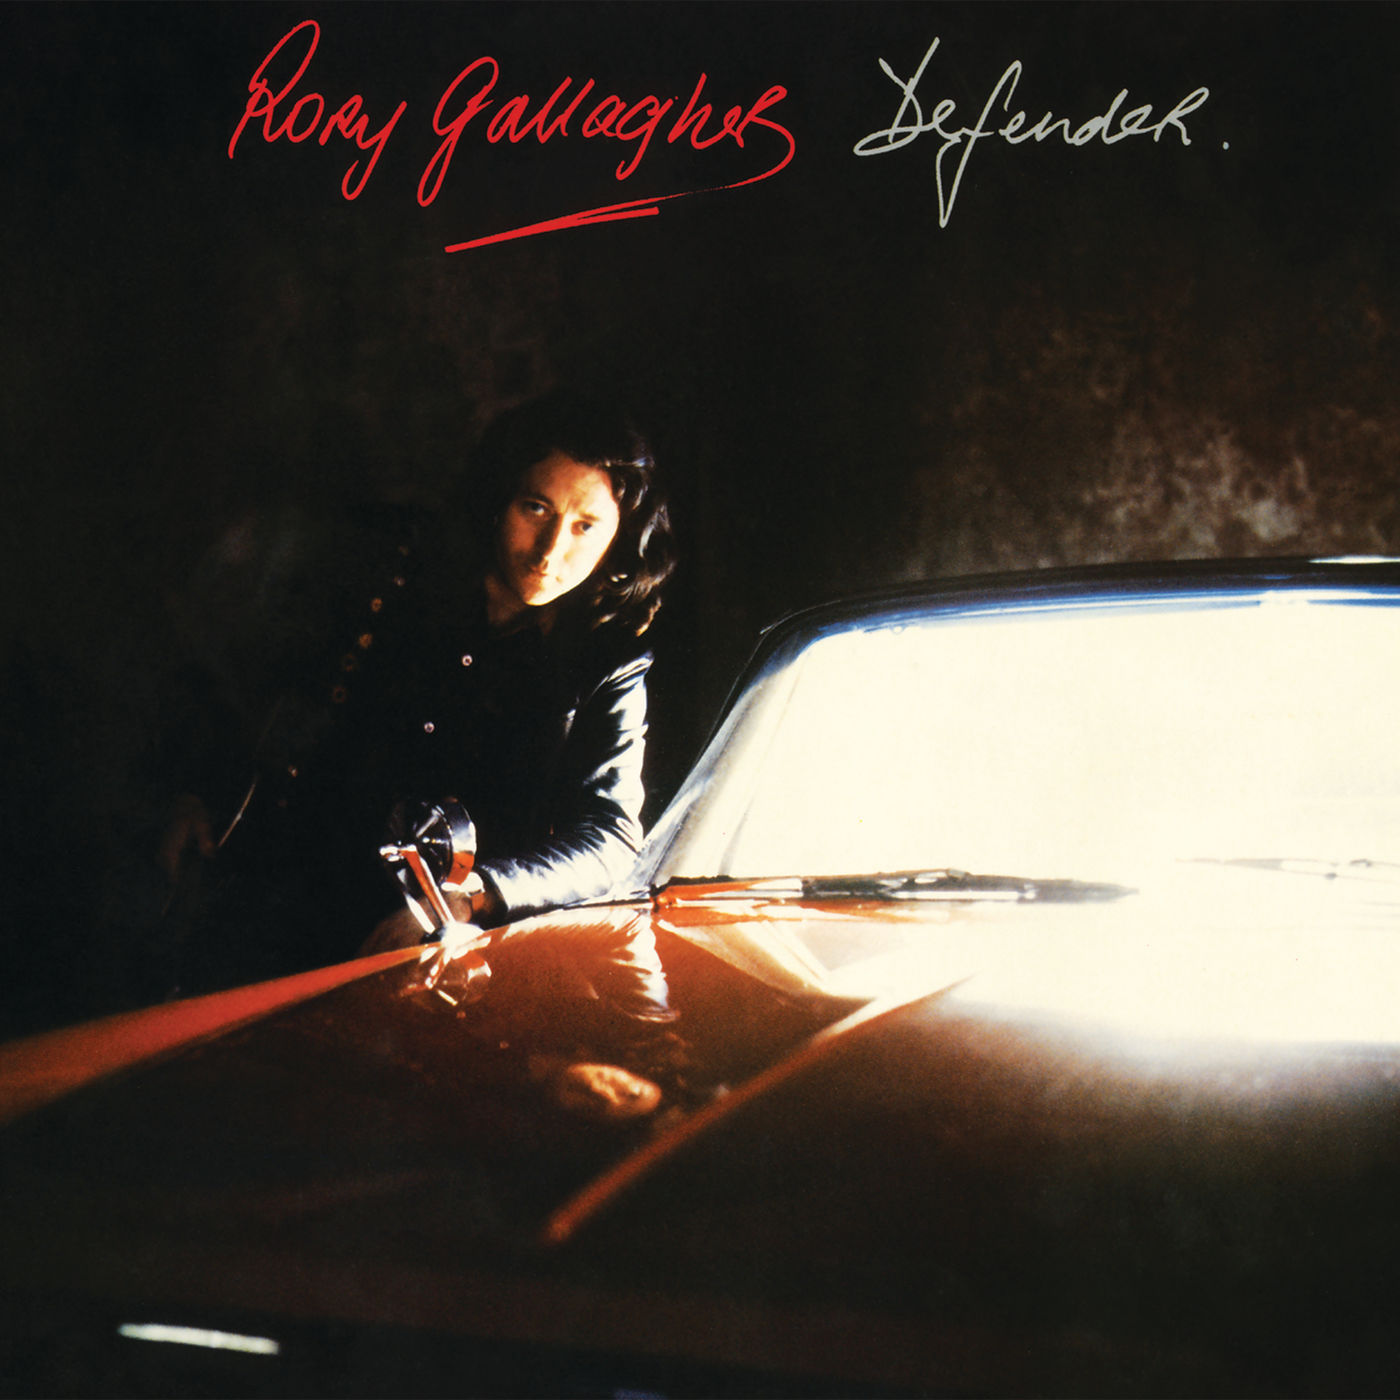 Rory Gallagher - Defender (Remastered) (1987/2020) [FLAC 24bit/96kHz]